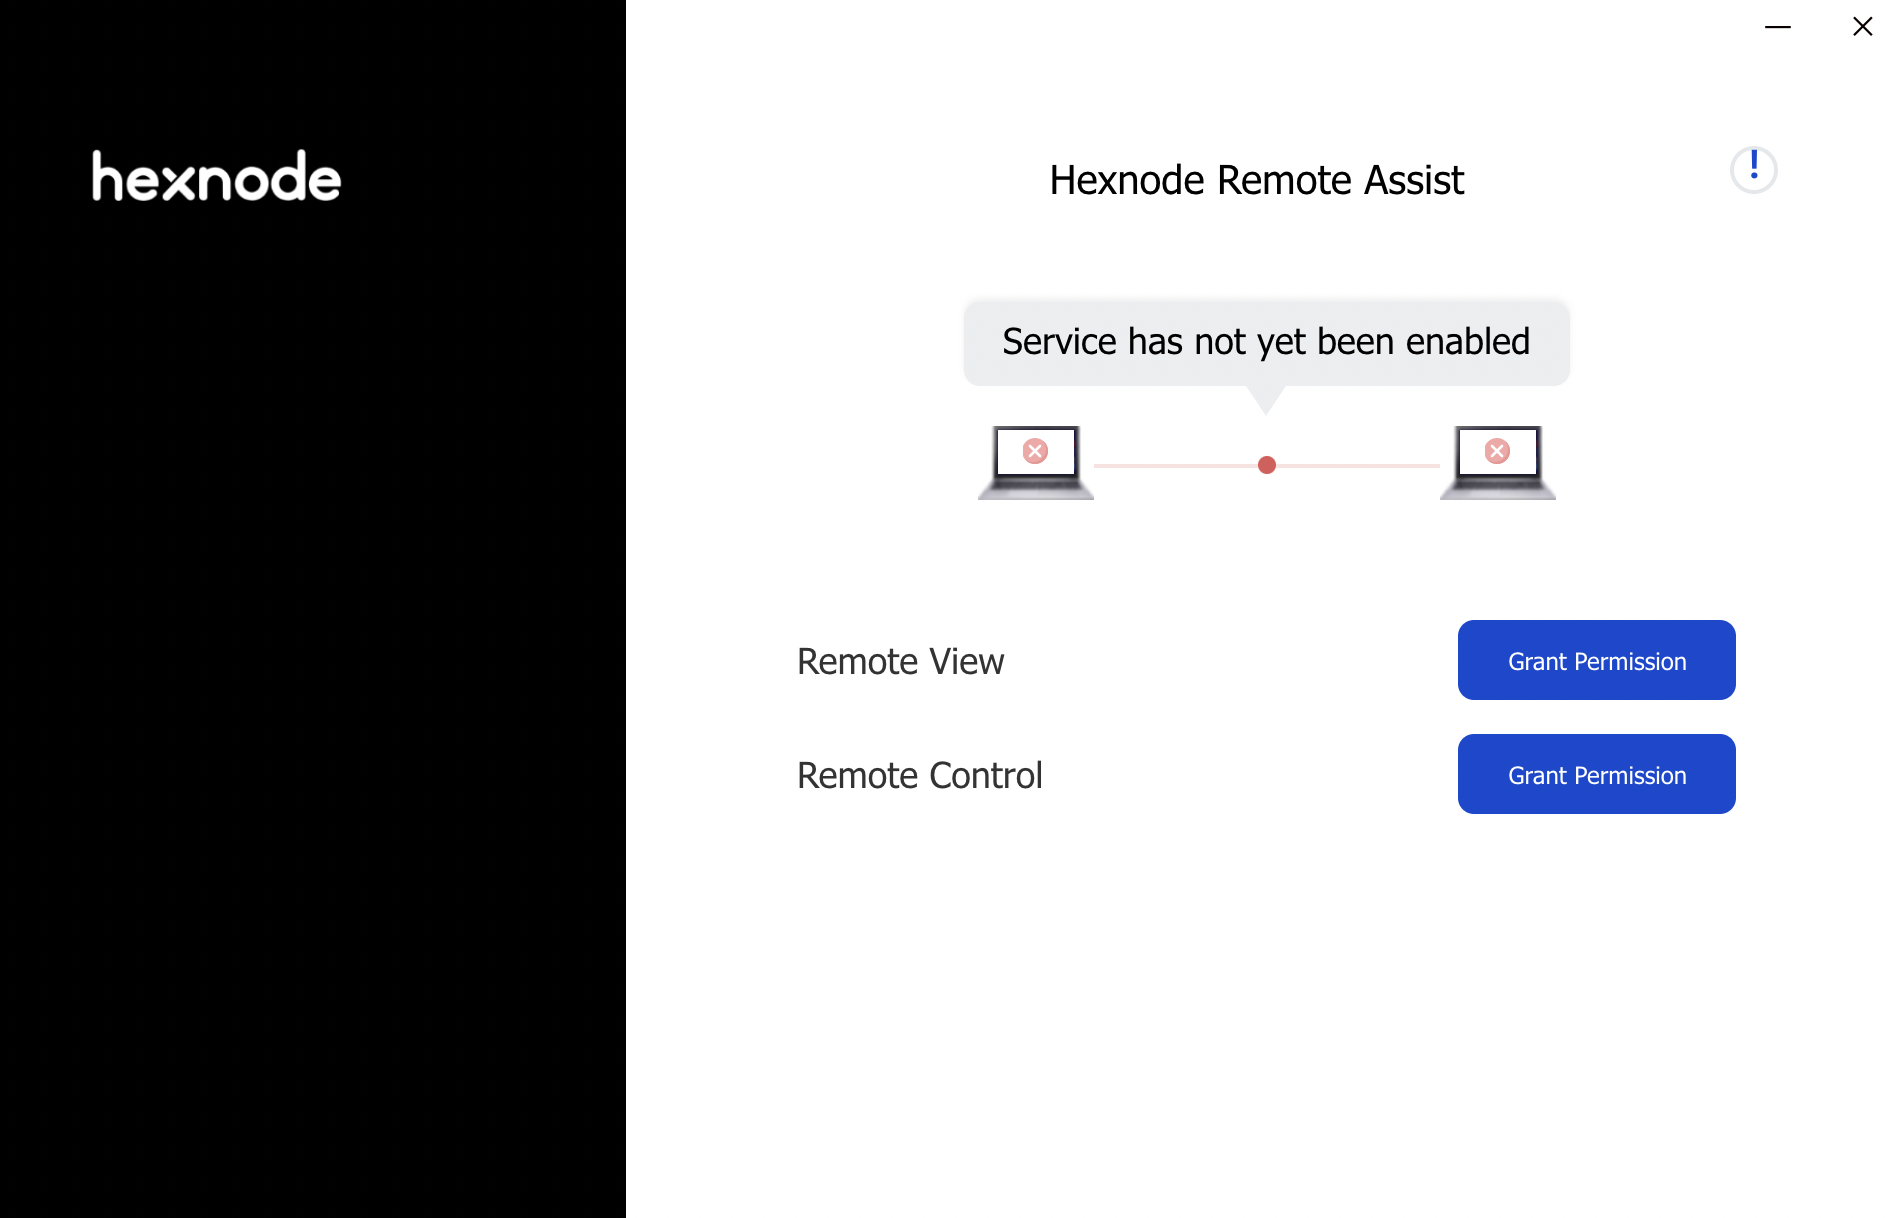 Grant permissions to start a remote view/control session